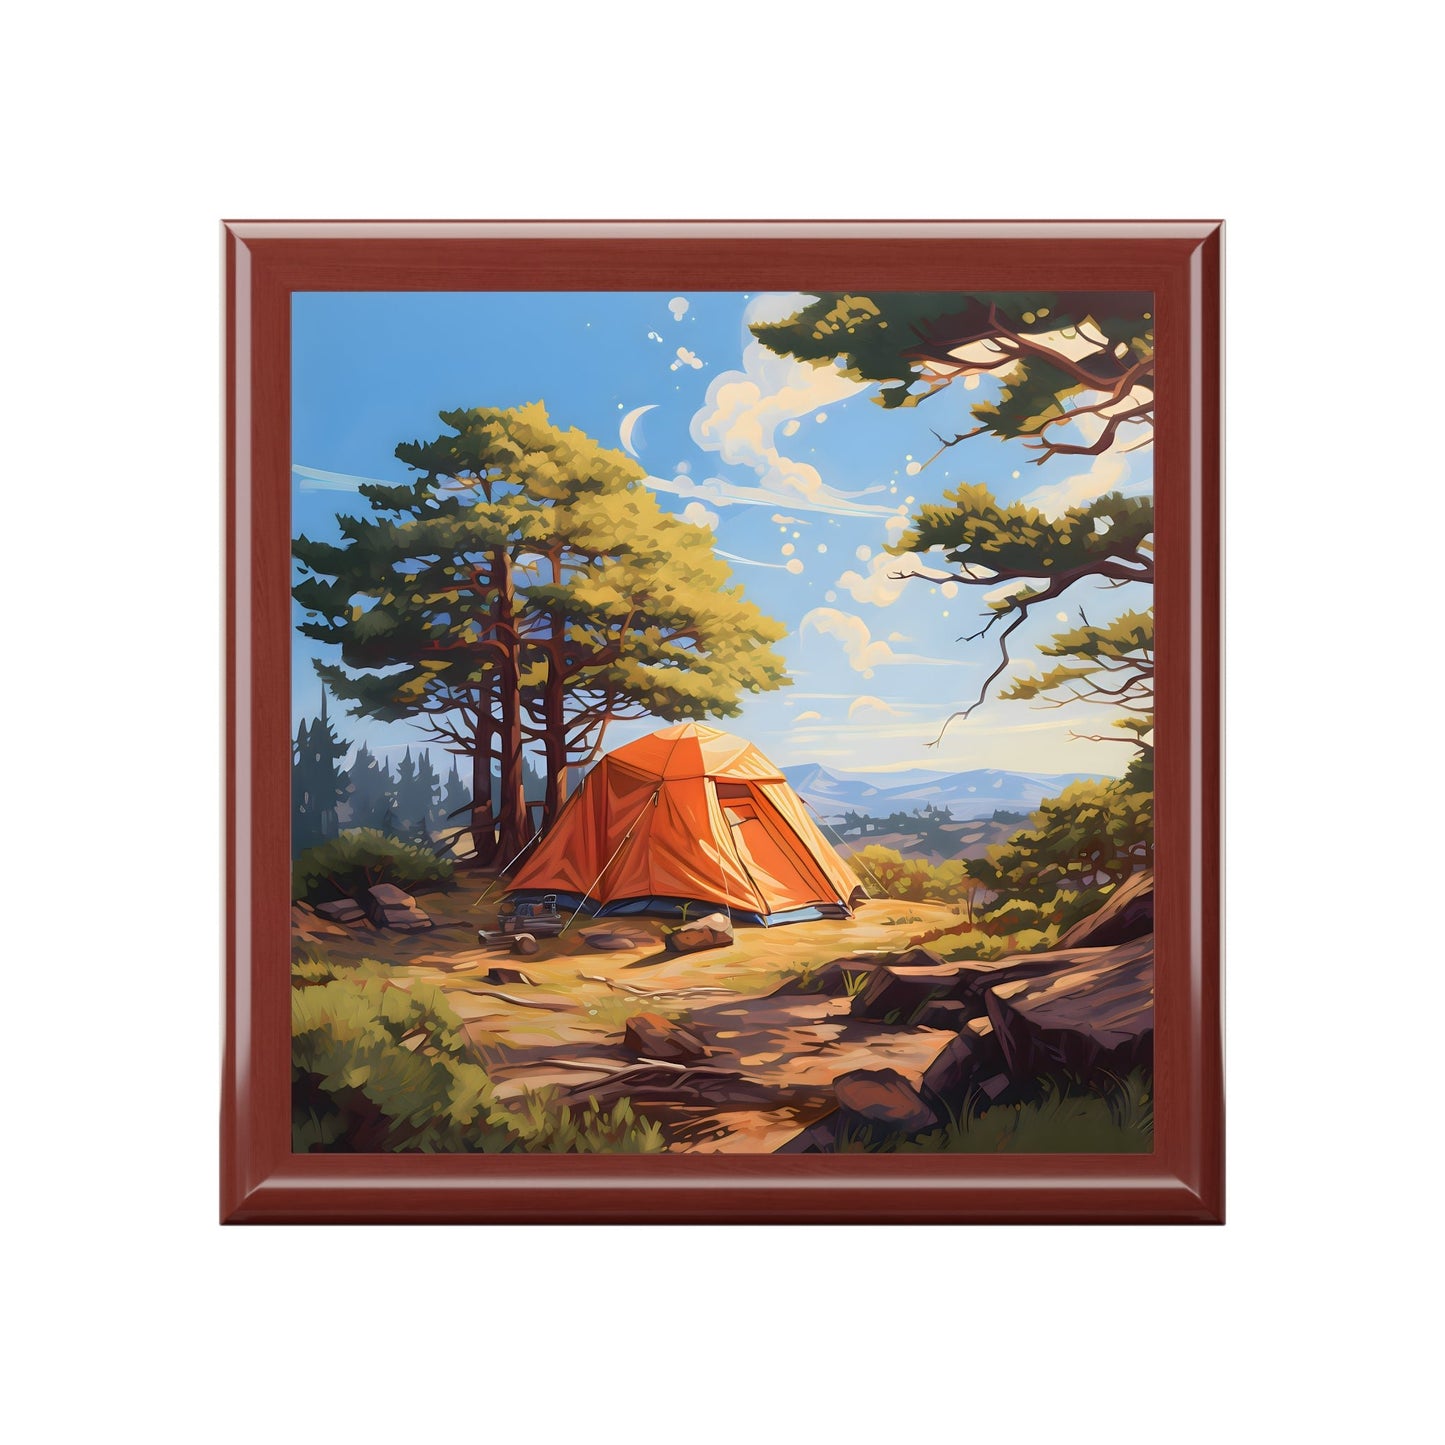 Camping in Maine Wood Keepsake Jewelry Box with Ceramic Tile Cover